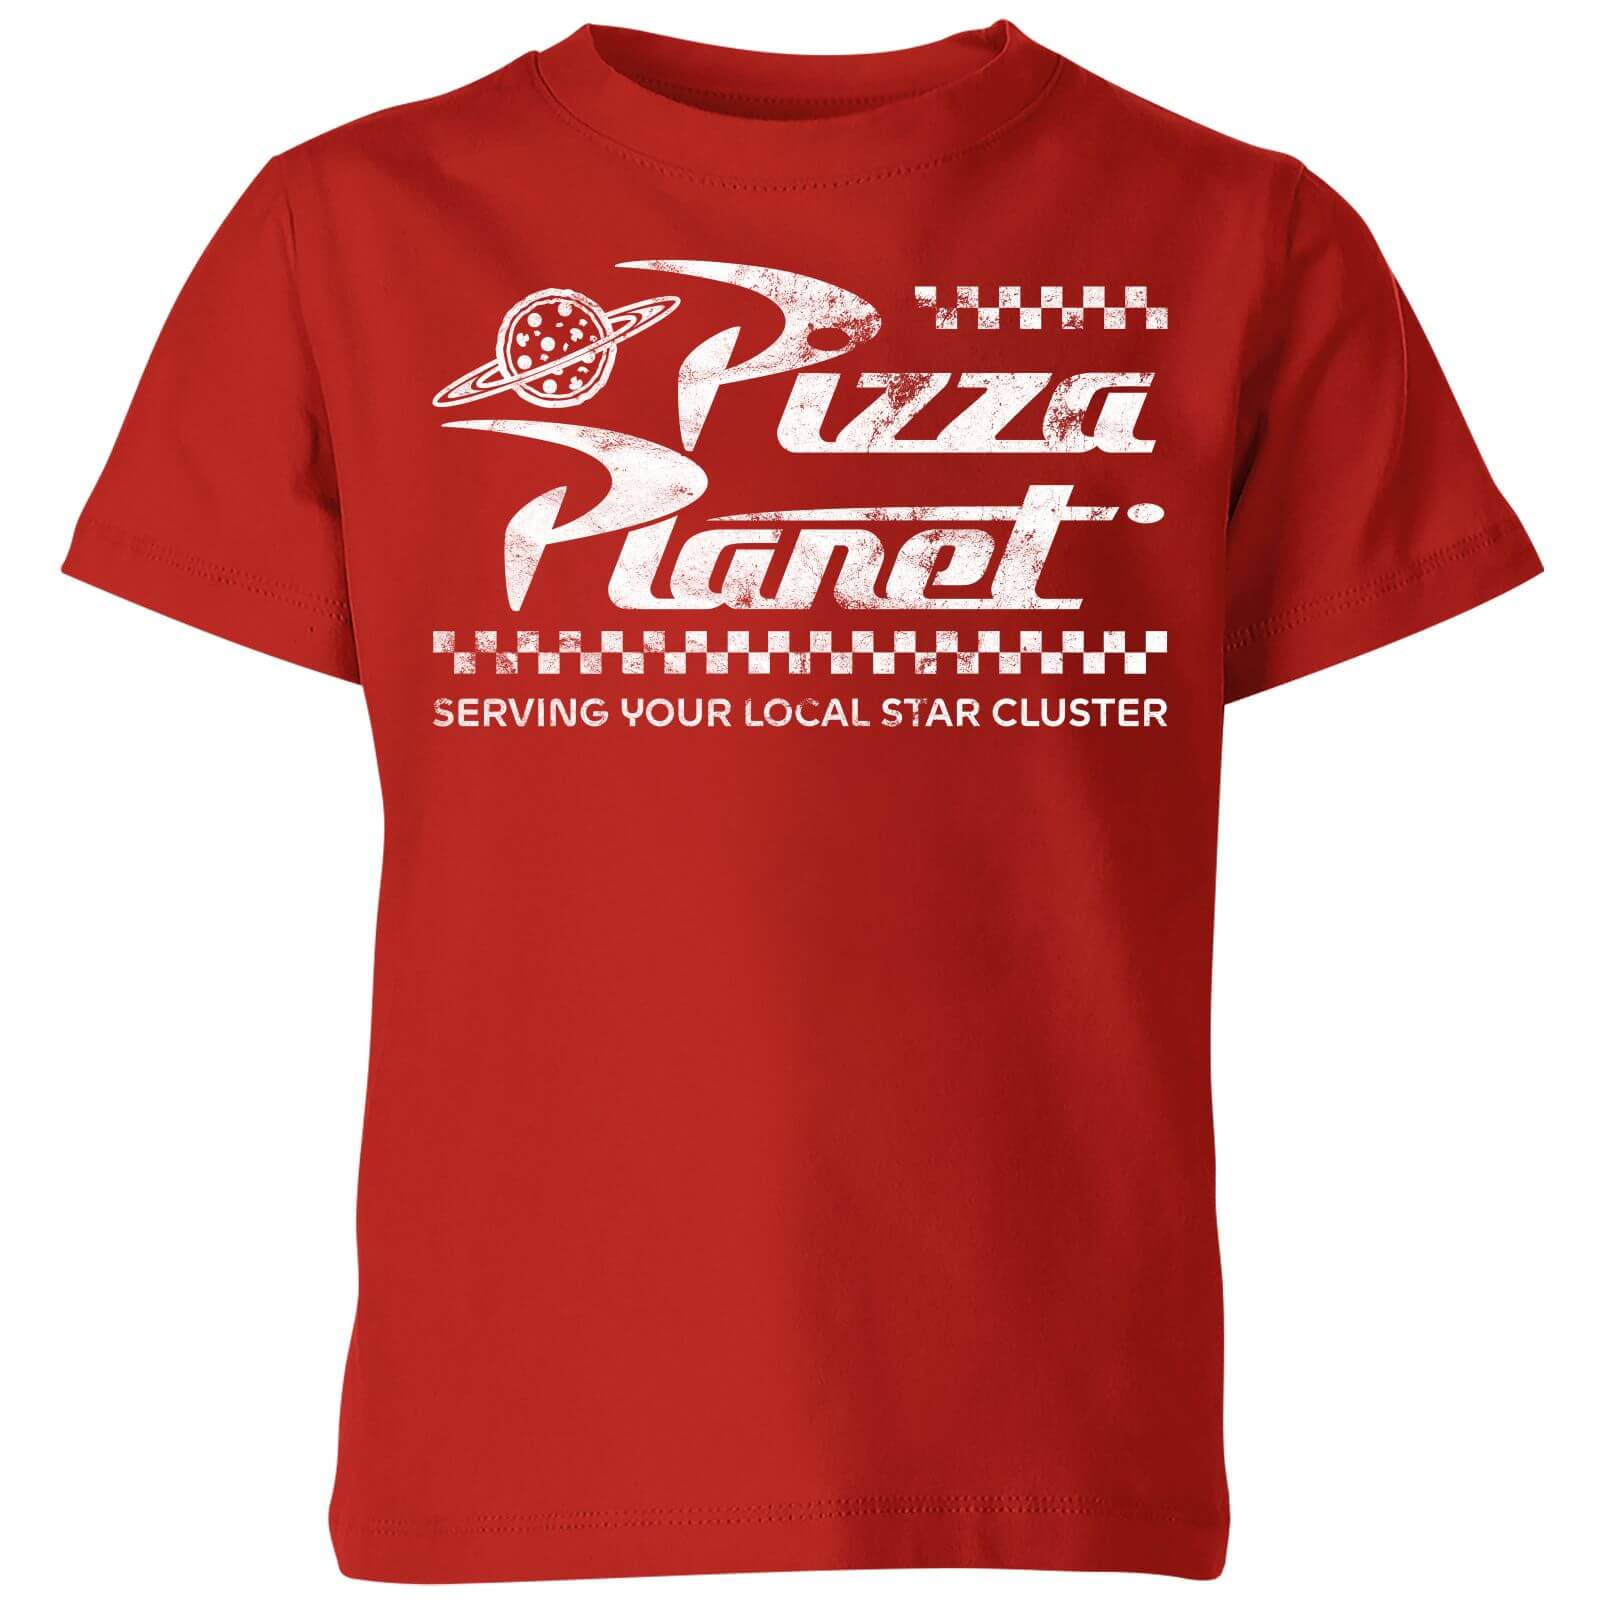 Toy Story x Pizza Planet Crew Kids' T-Shirt - Red - 3-4 ans